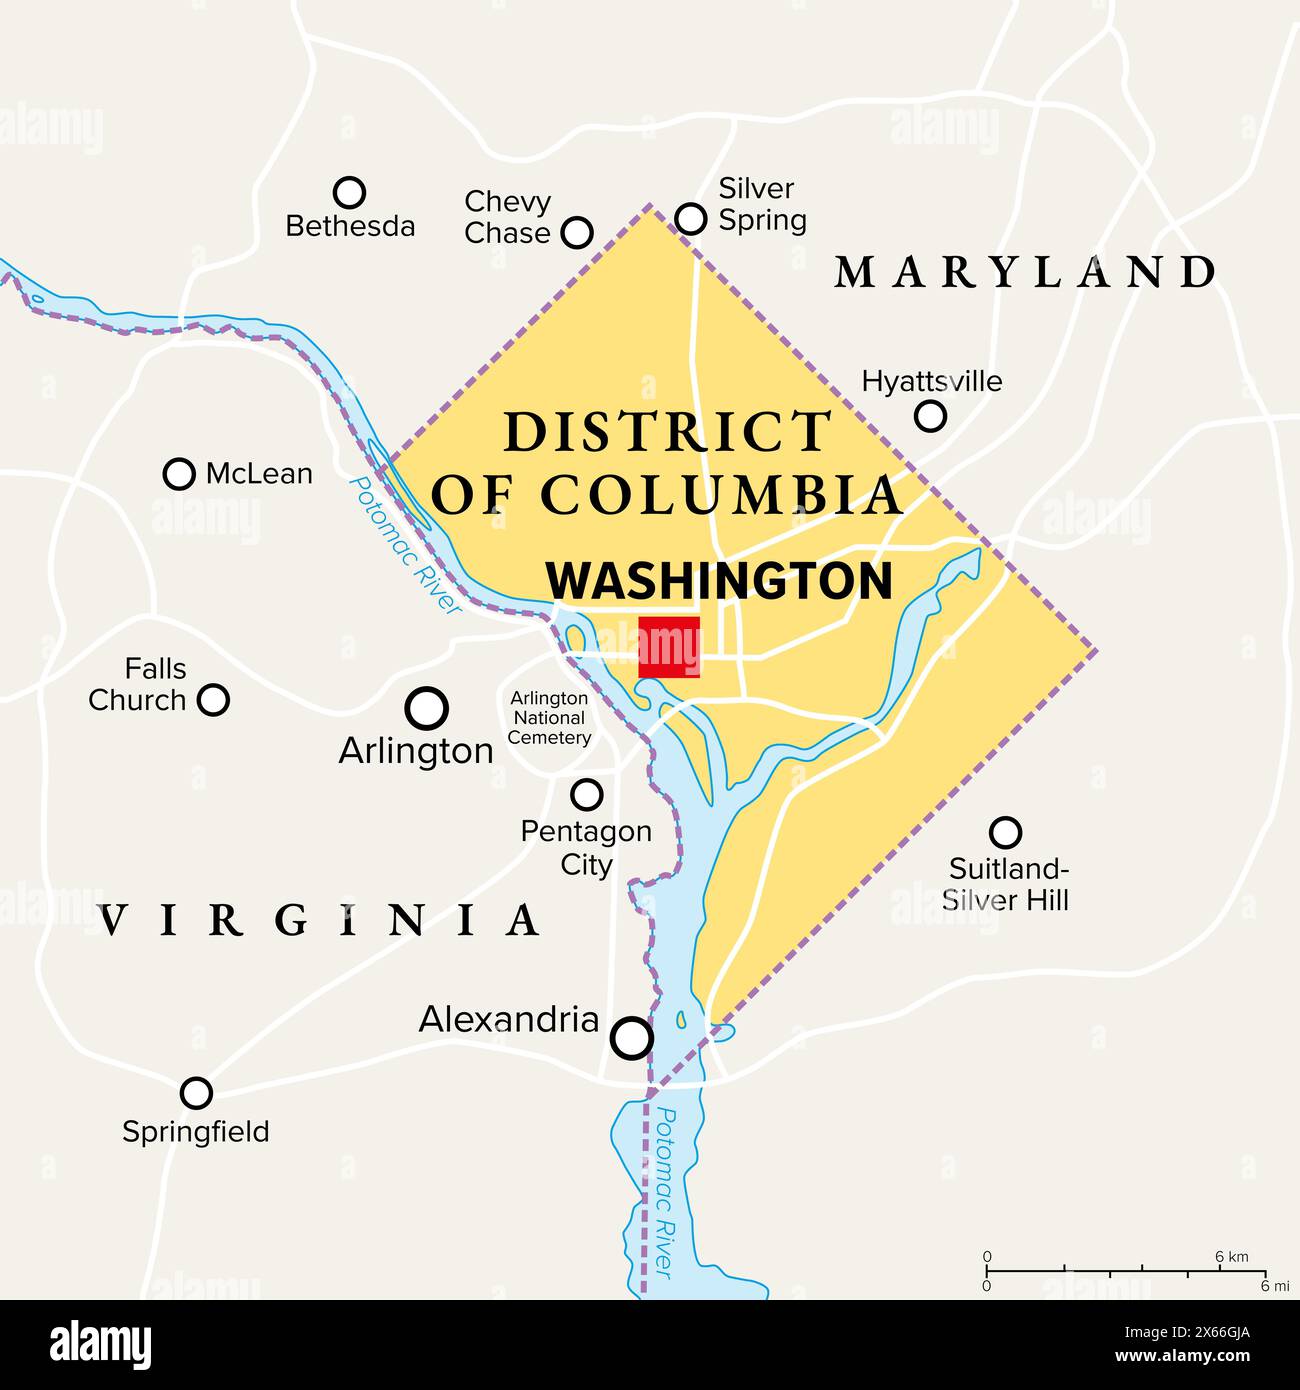 Washington, D.C., political map. District of Columbia, capital city and federal district of the United States. Located on the Potomac River. Stock Photo